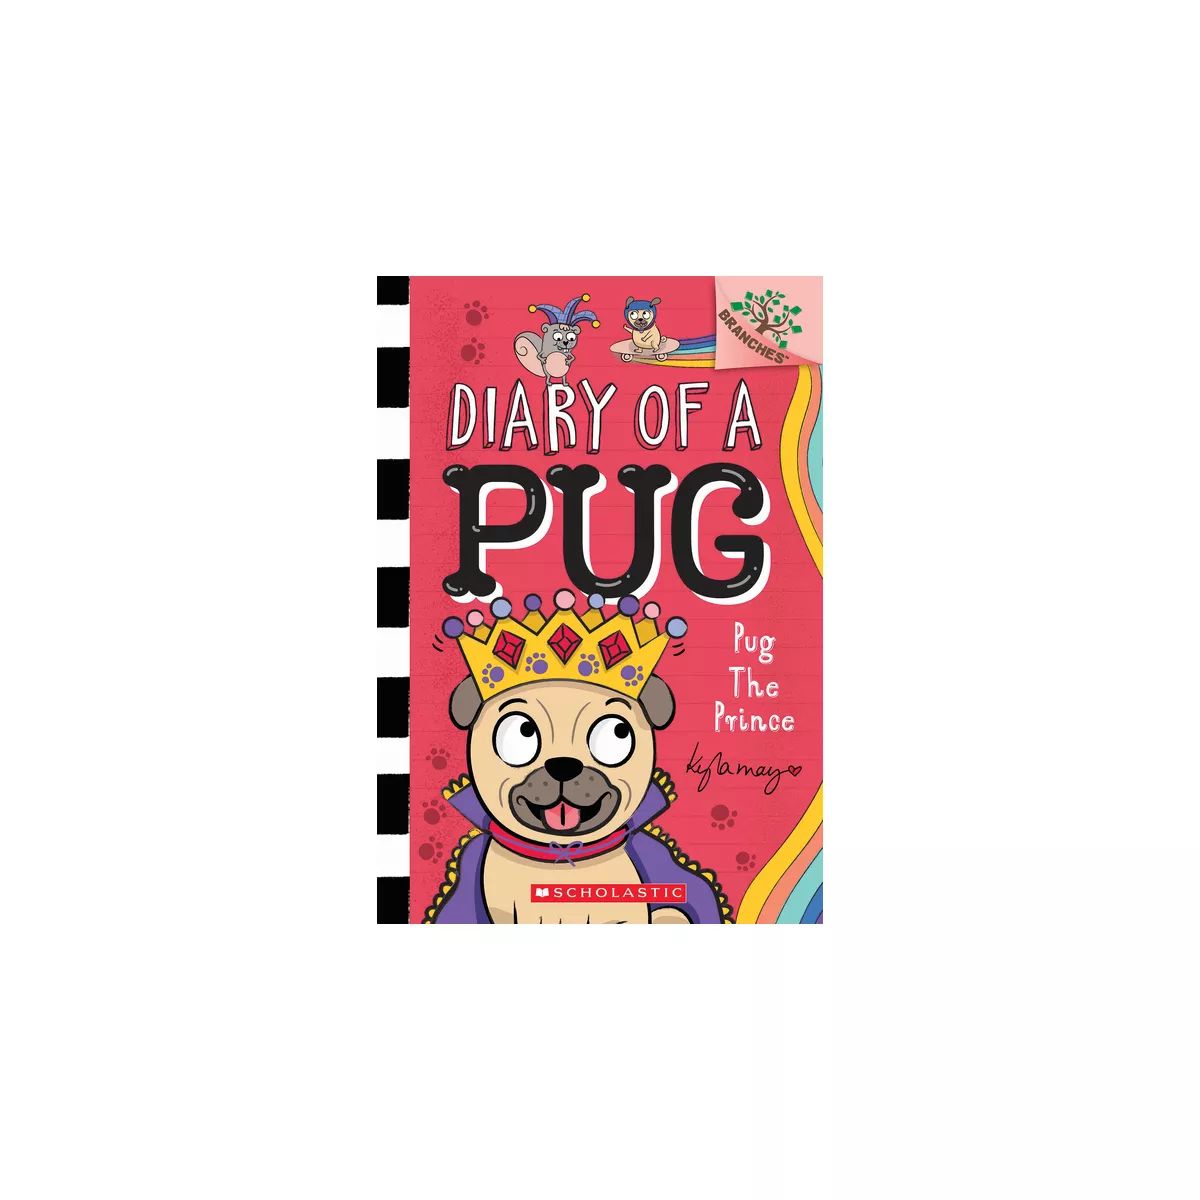 Pug the Prince: A Branches Book (Diary of a Pug #9) - by Kyla May | Target